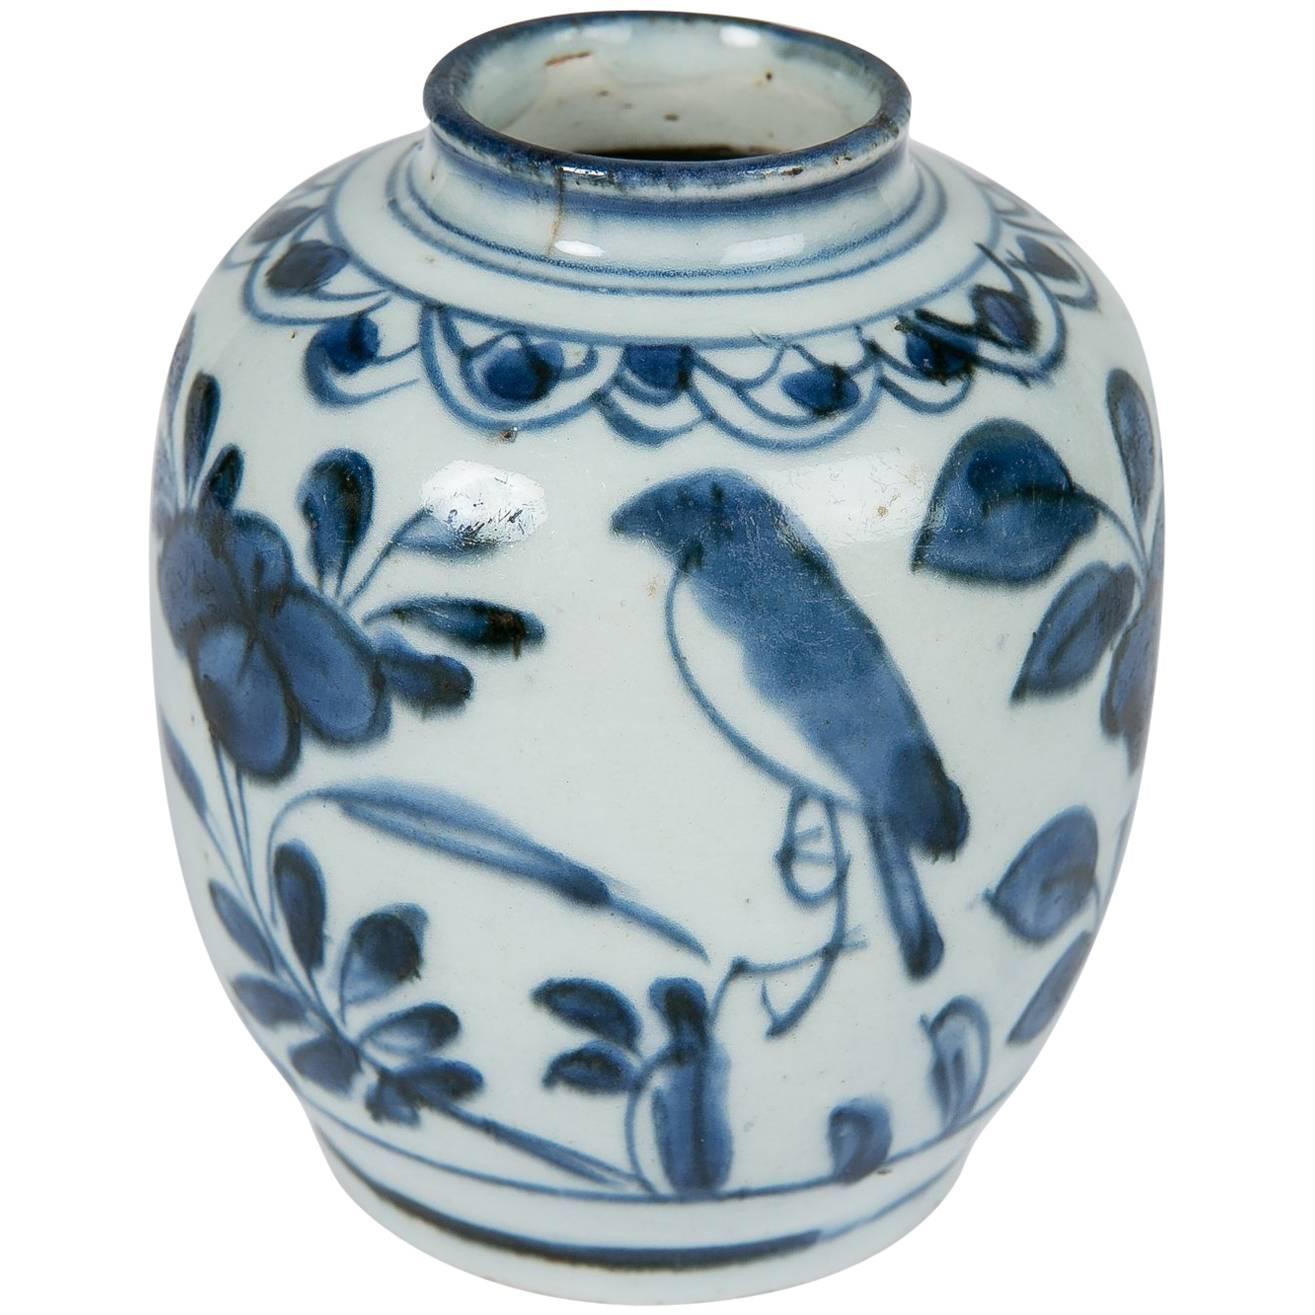 Chinese Blue and White Small Zhangzhou Porcelain Vase Made circa 1590